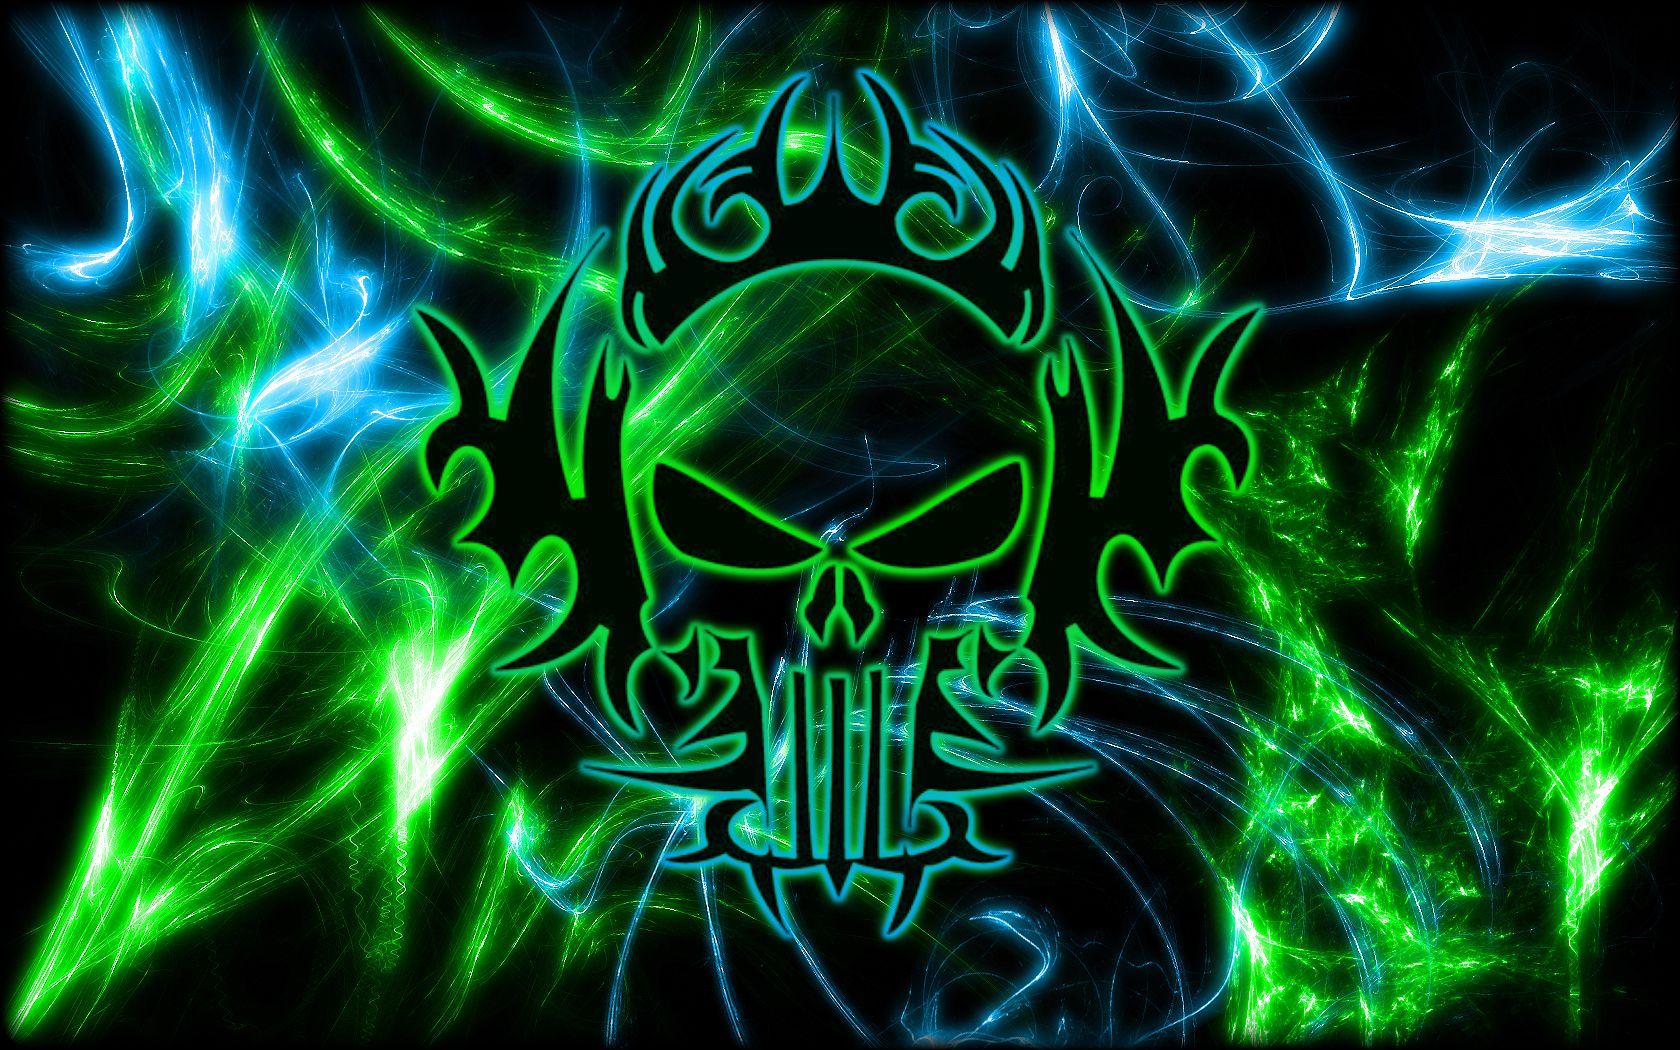 Skull Wallpapers and Backgrounds image Free Download